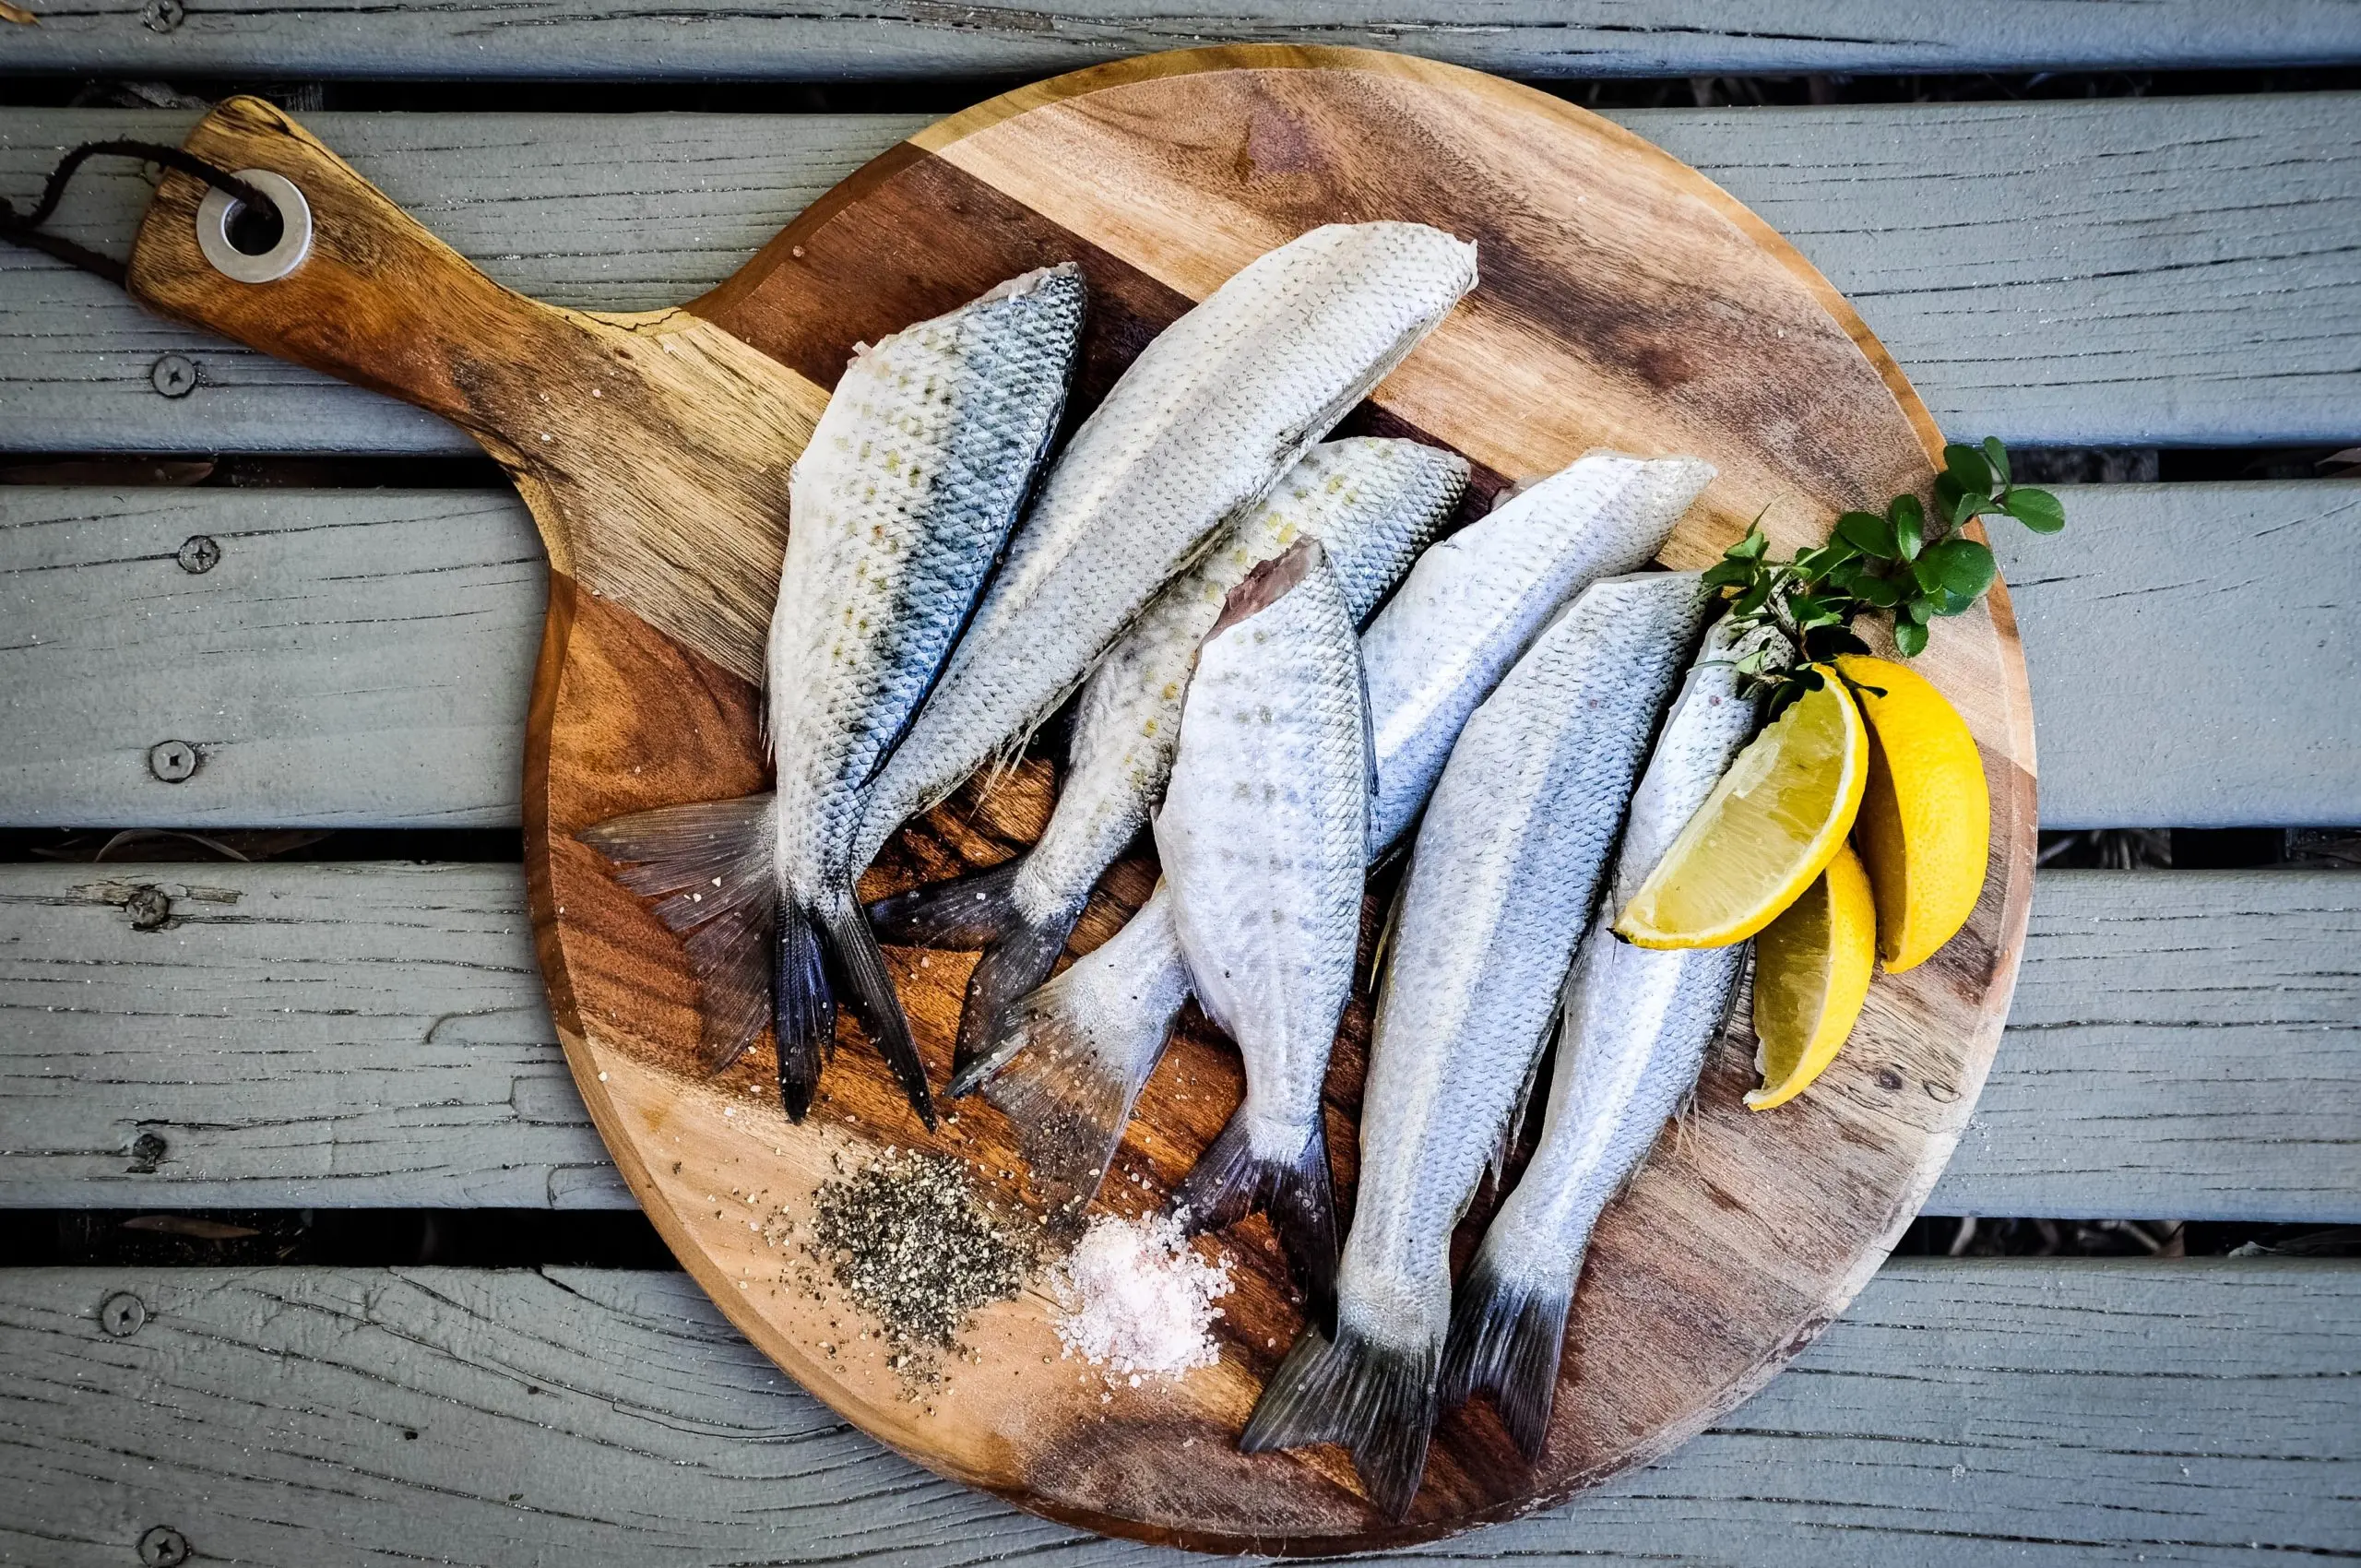 smoked fish allergy - What are the symptoms of fish allergy